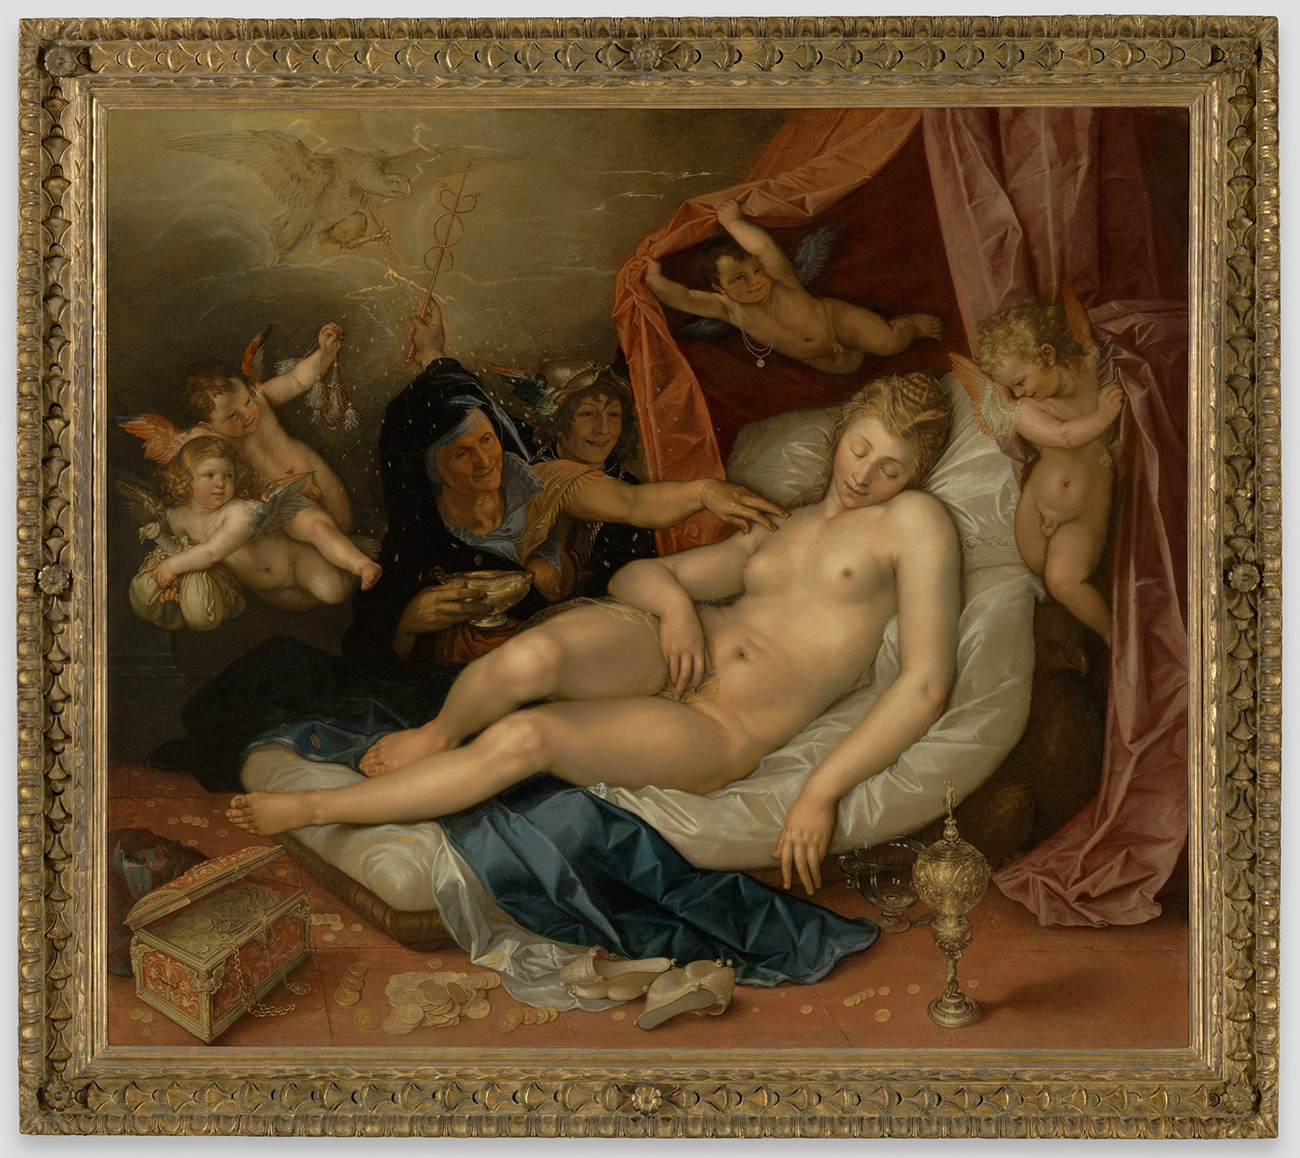 Nude woman sleeps on a propped up bed with red curtains held back by two child angels. Two women tend to the sleeper, while two more angels hover behind them. Jewels and coins are strewn on the floor